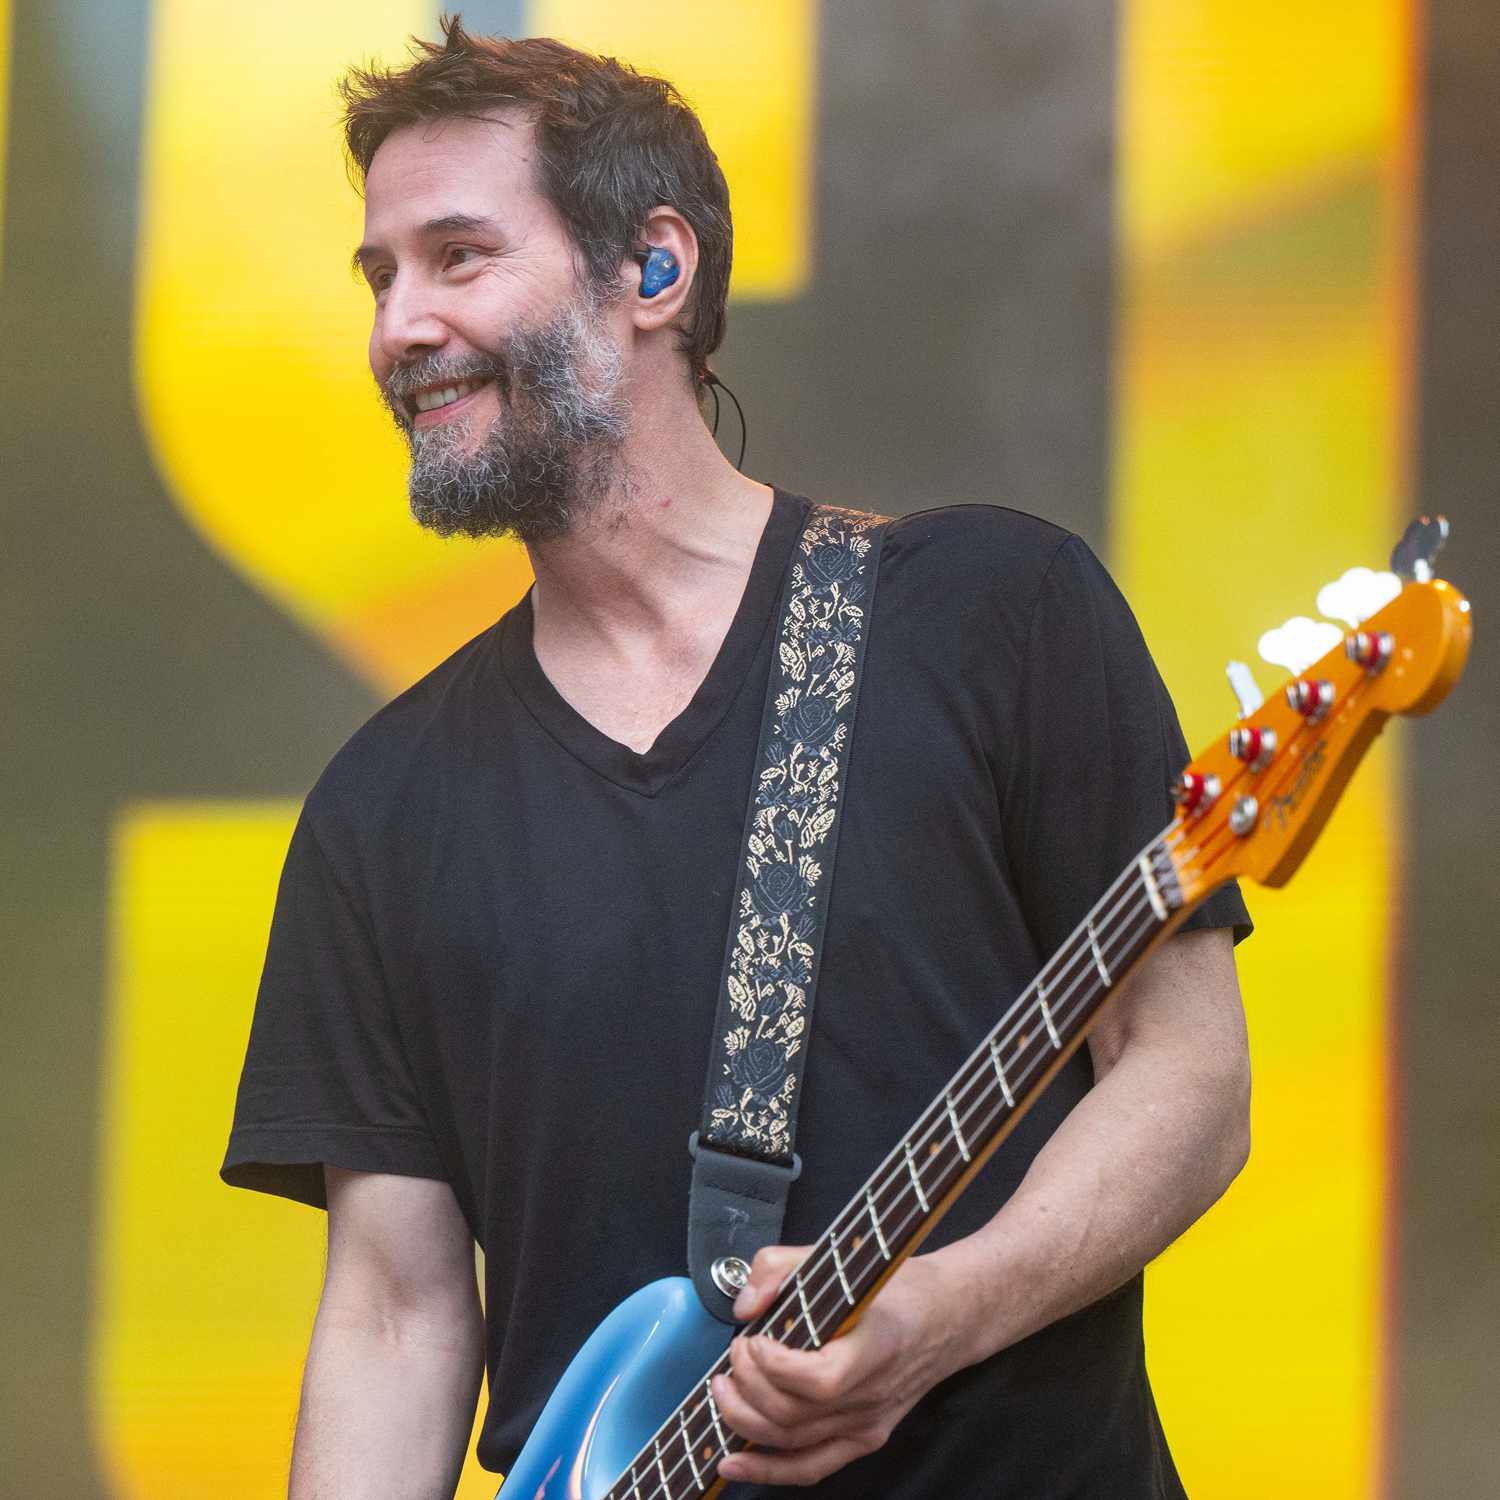 Keanu Reeves, alongside his band Dogstar, delivered a memorable performance at the inMusic Festival on Lake Jarun in Zagreb, Croatia.